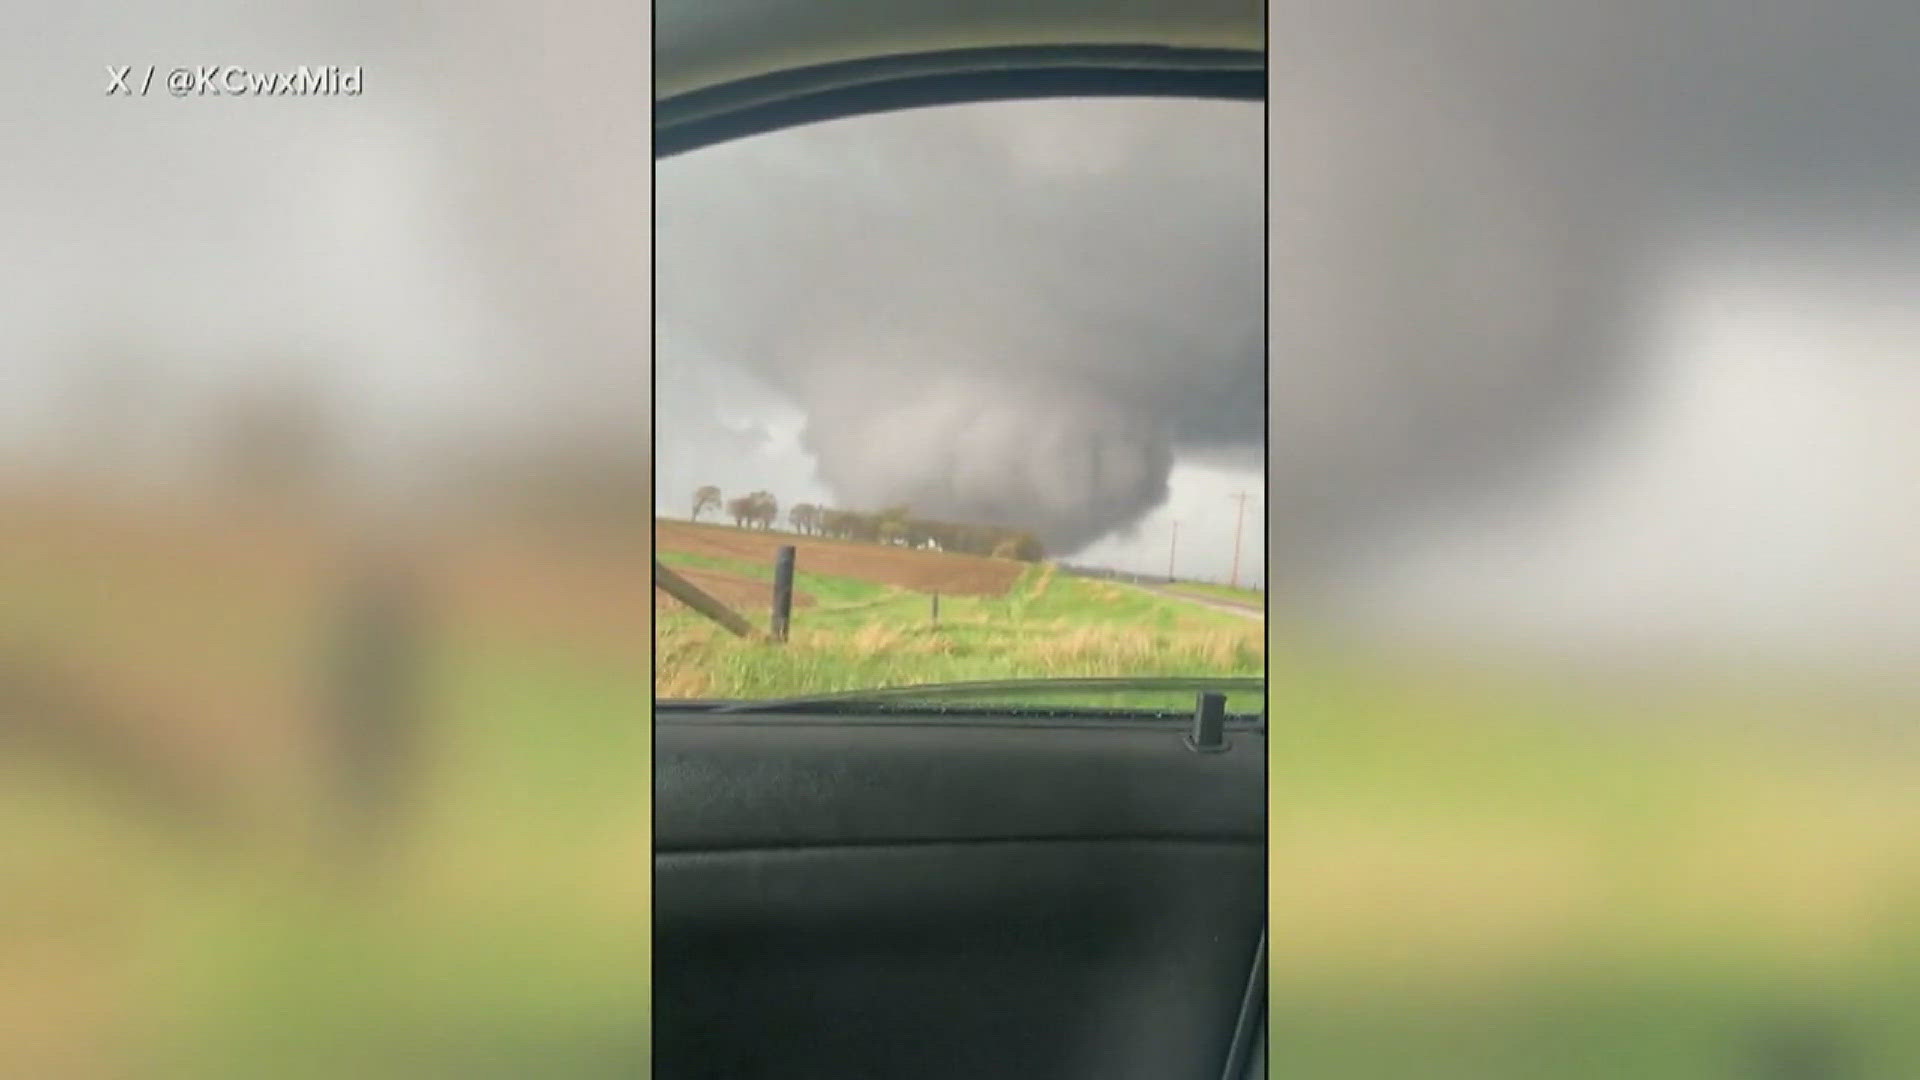 In Iowa, the NWS says more than 100 structures were damaged.